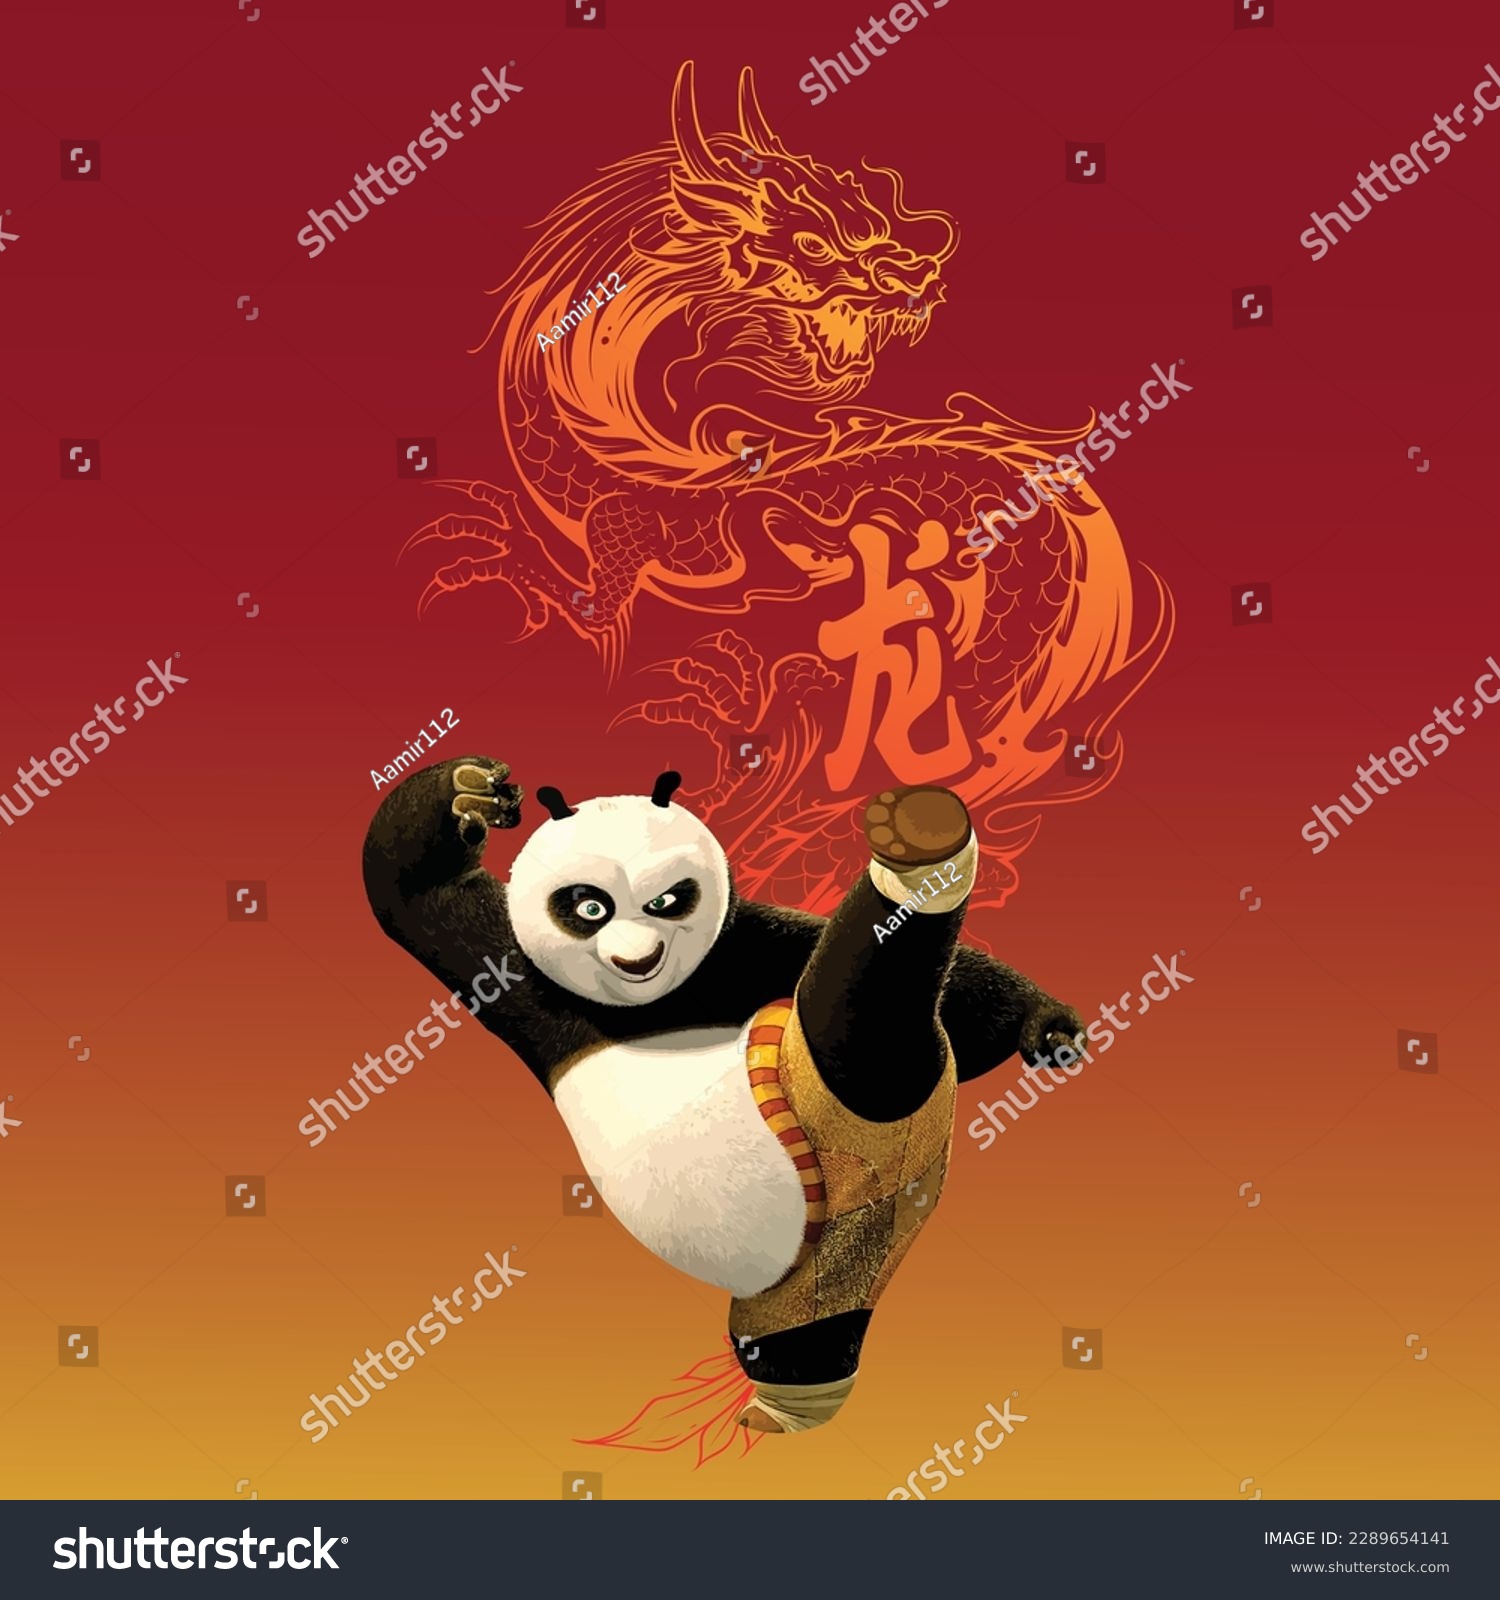 SVG of Kungfu panda with dragon iconic poster design vector svg